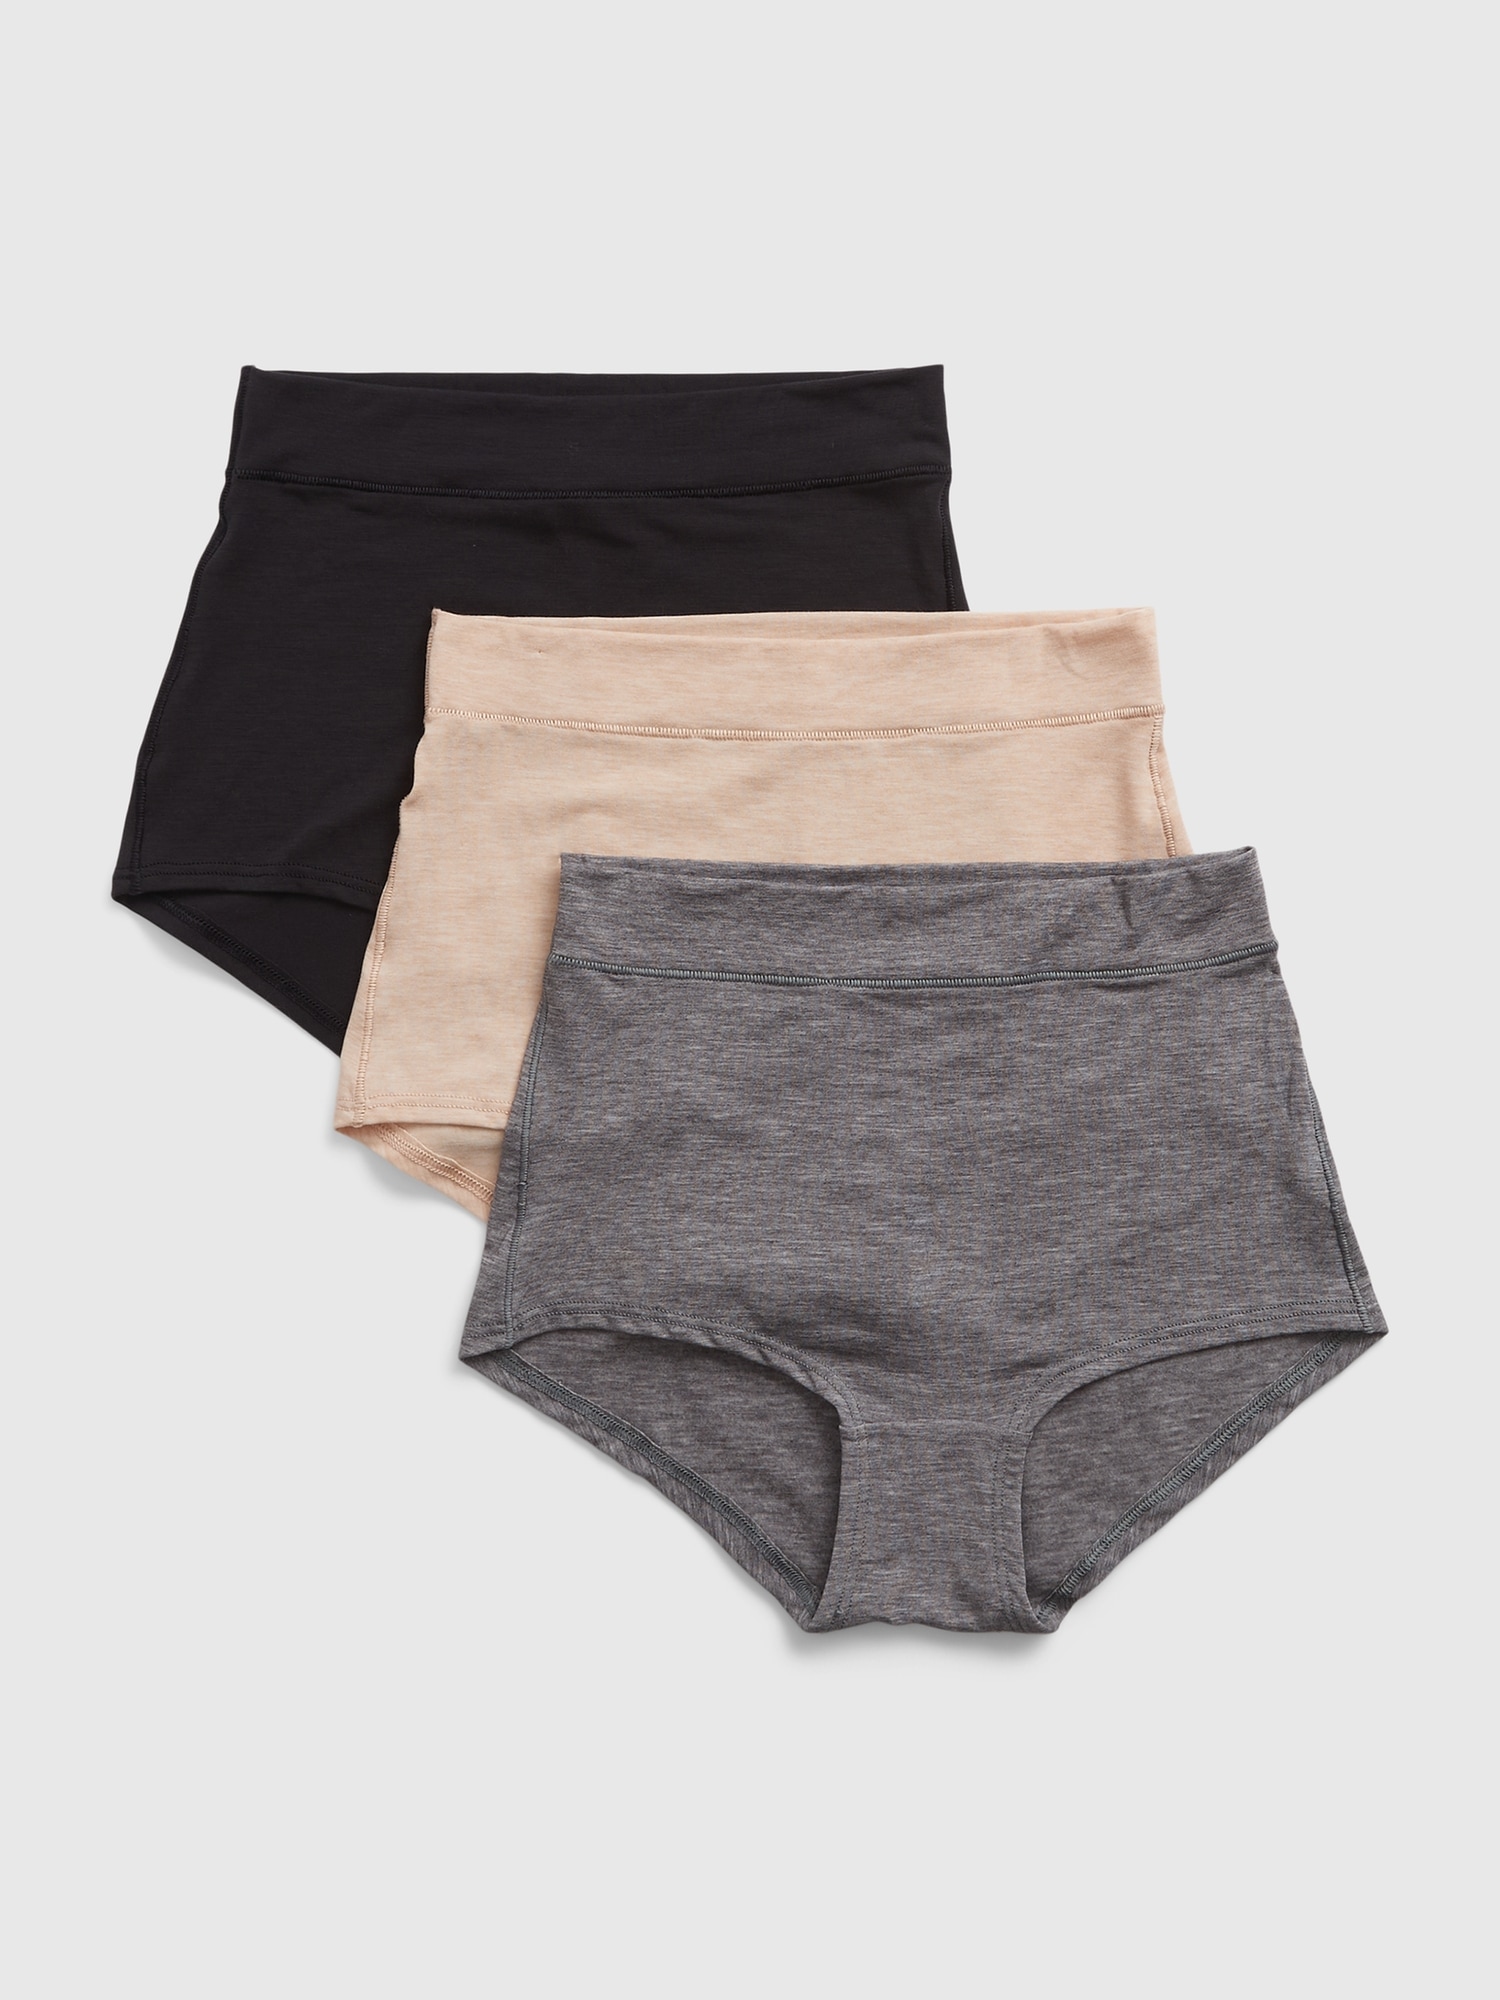 The Warner's Blissful Benefits Underwear Might Be the Comfiest on the  Internet